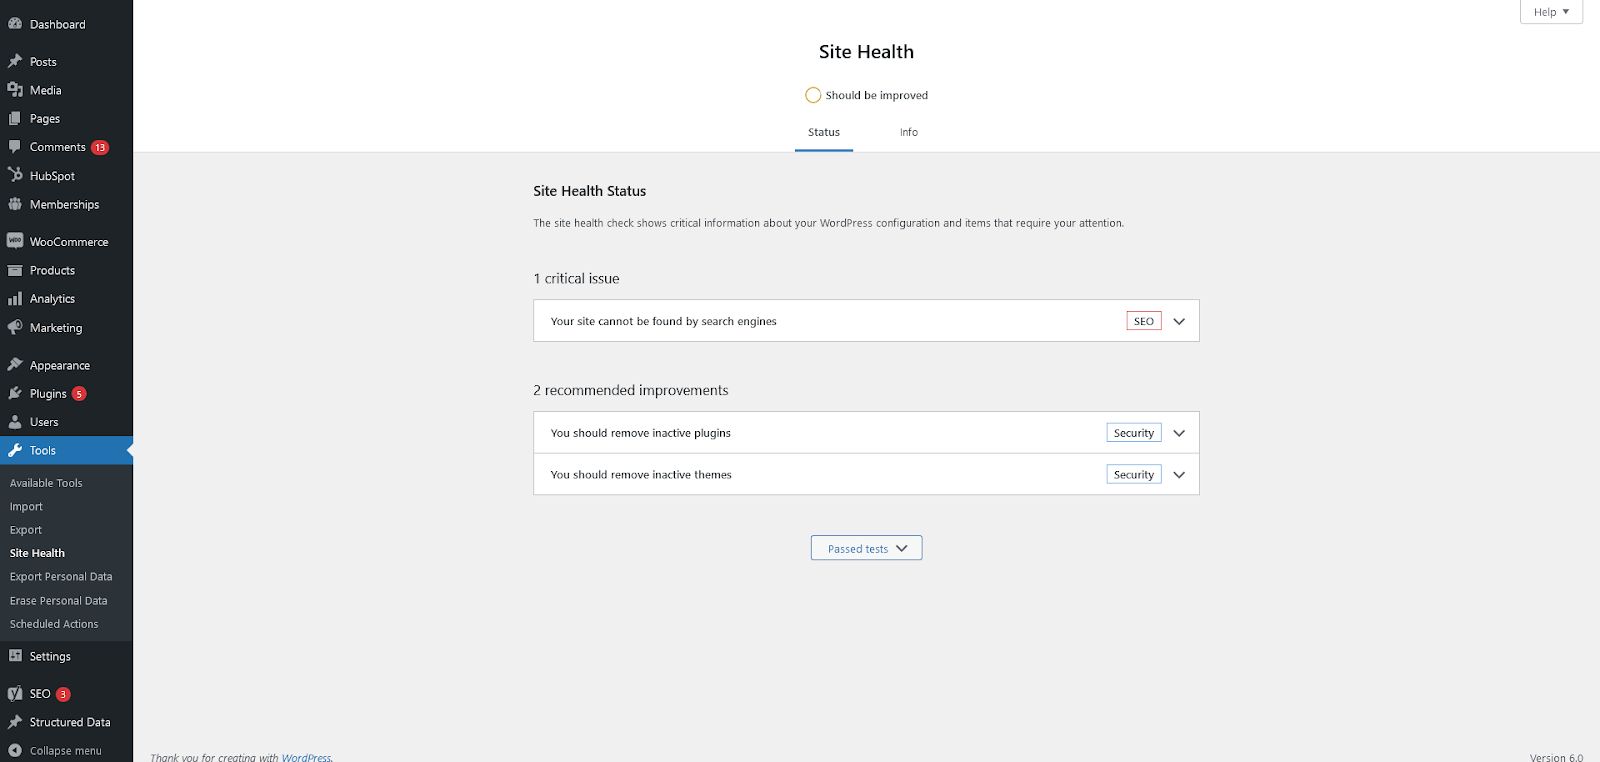 Site Health Page.